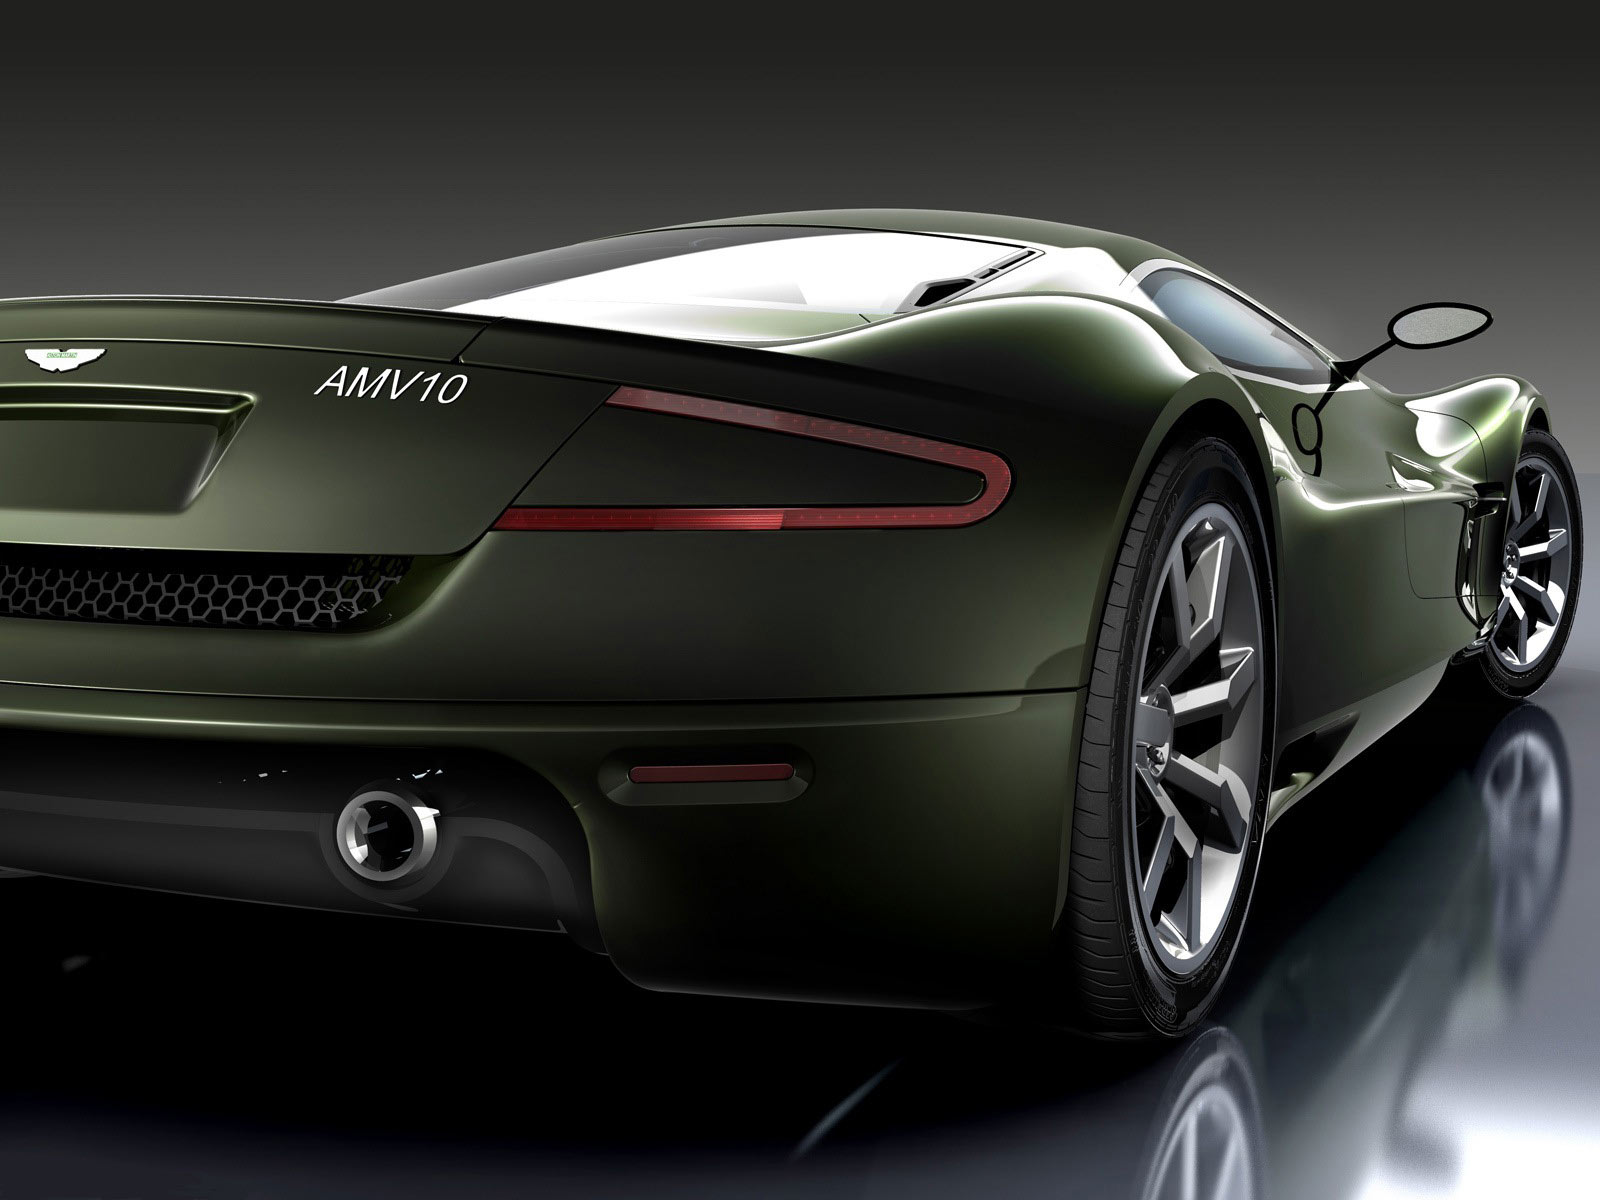 Gallery Auto Car Hot HQ Aston Martin Amv10 Sports Cars Wallpapers